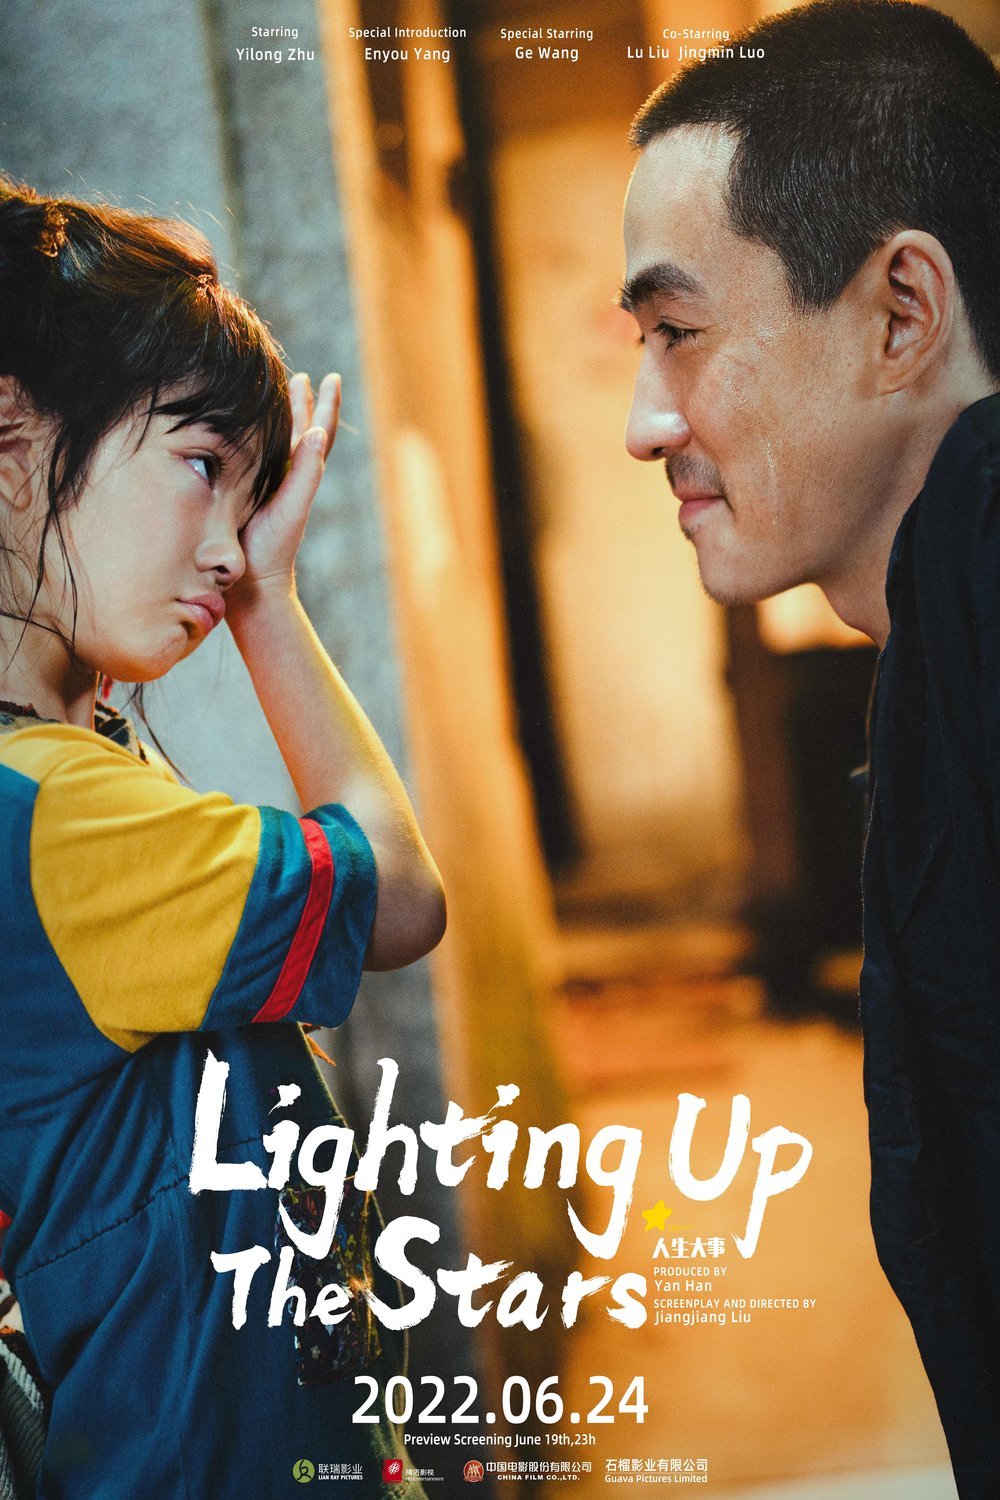 Poster of the movie Lighting up the Stars